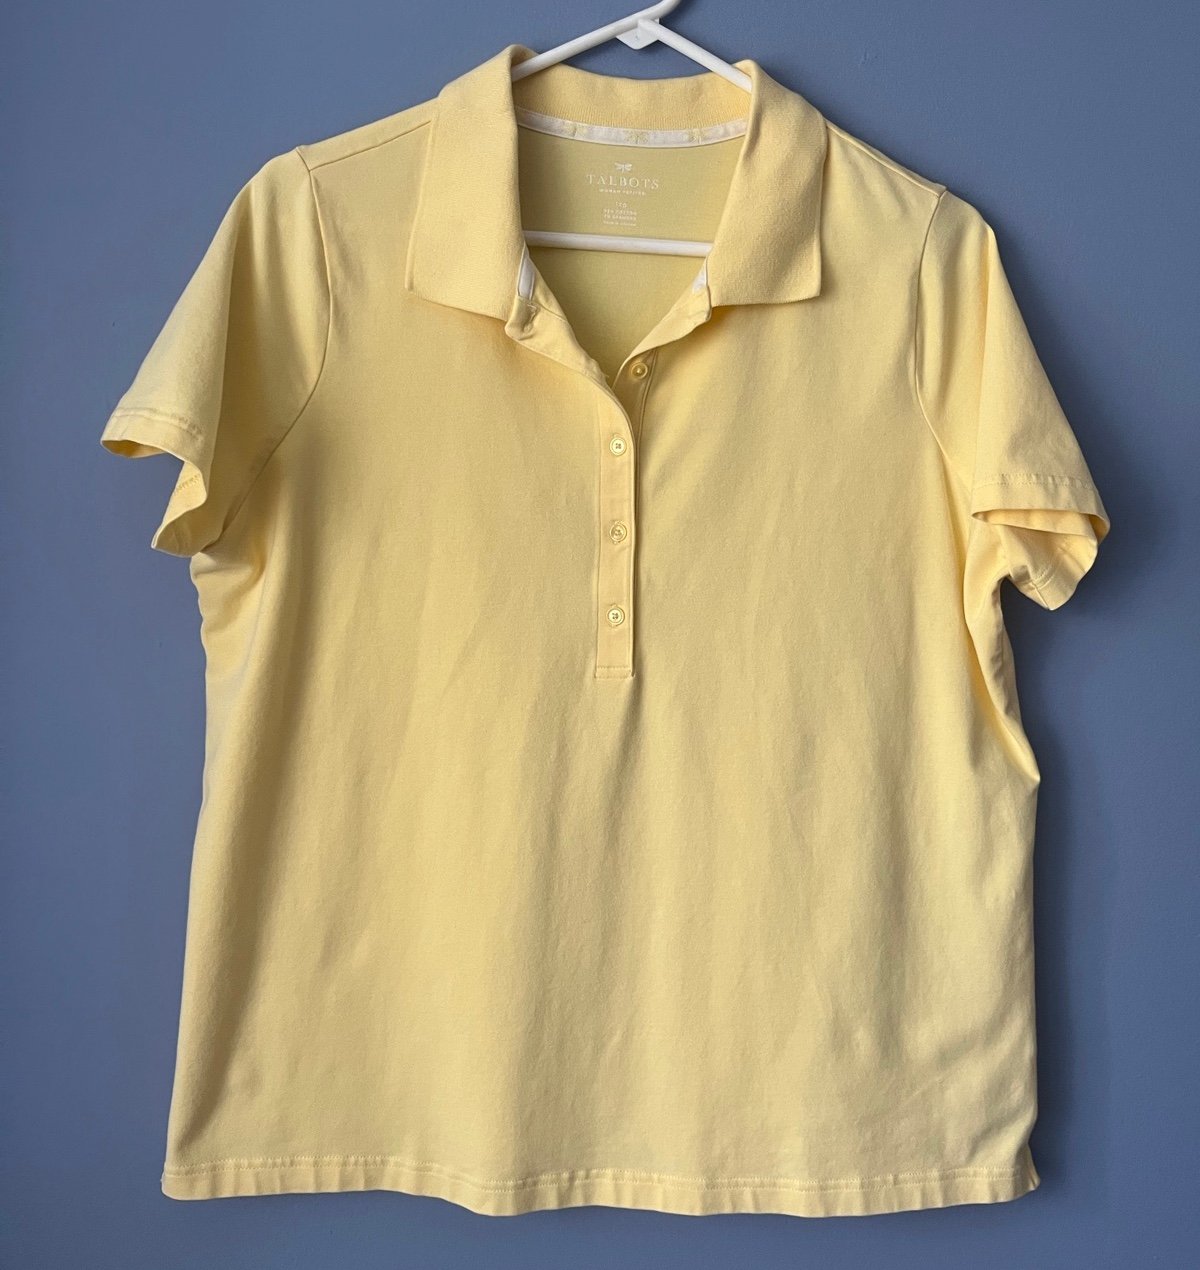 cheapest place to buy  Talbots yellow short sleeve polo